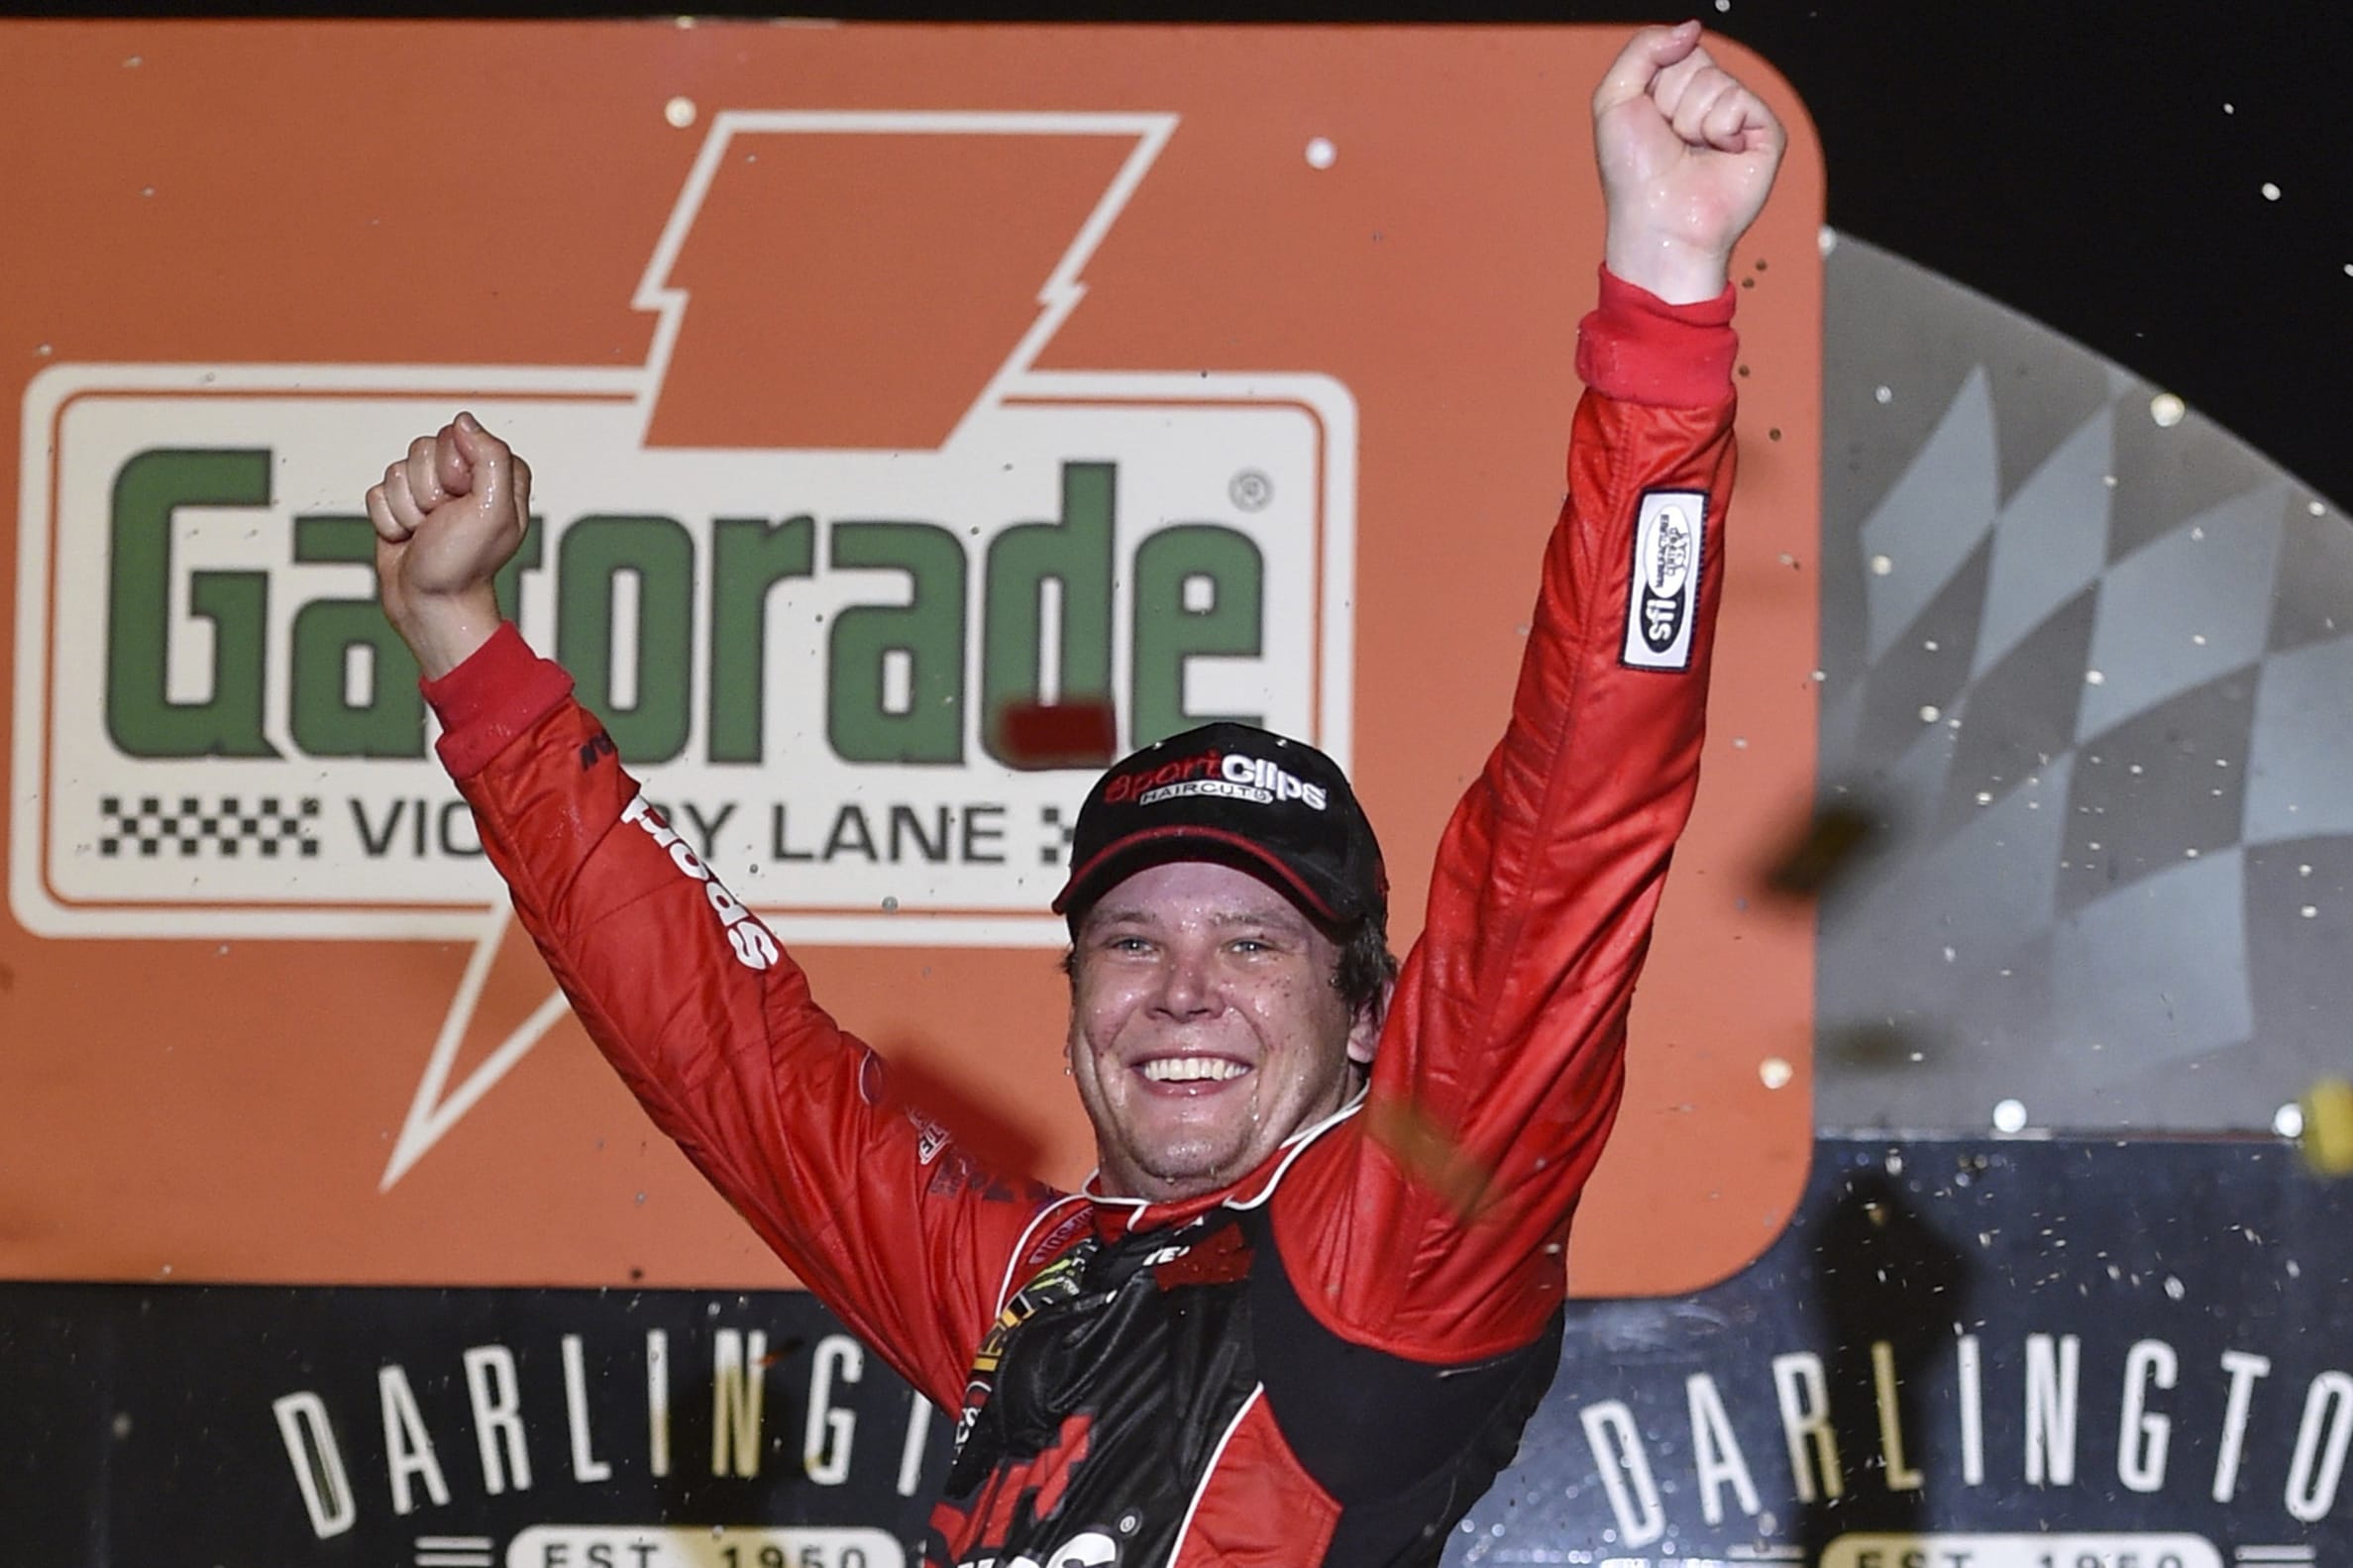 Erik Jones celebrates his victory after a NASCAR Cup Series auto race on Sunday, Sept. 1, 2019, at Darlington Raceway in Darlington, S.C. Jones held off Joe Gibbs Racing teammate Kyle Busch to win the rain-delayed Southern 500 that ended early Monday morning.